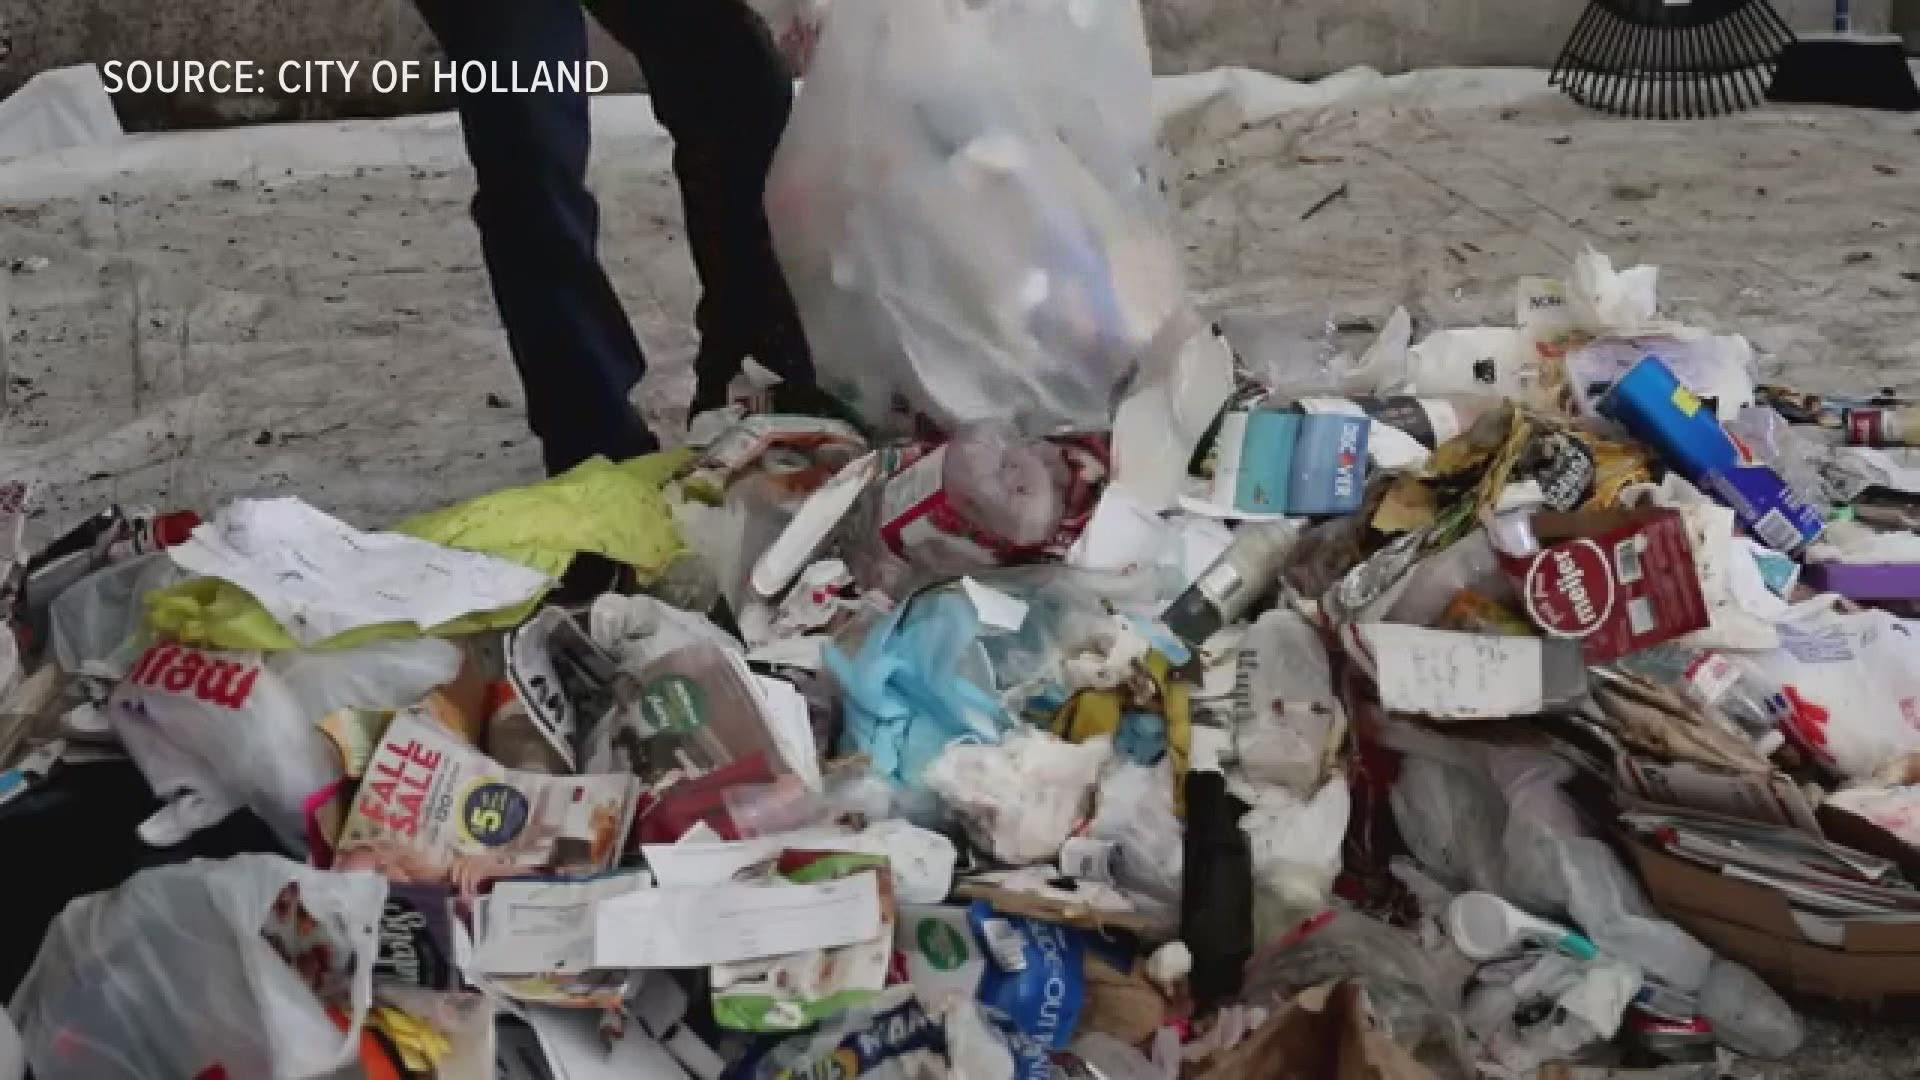 More than half of the people living in Holland participate in the city's recycling program. But that program will look dramatically different next spring.